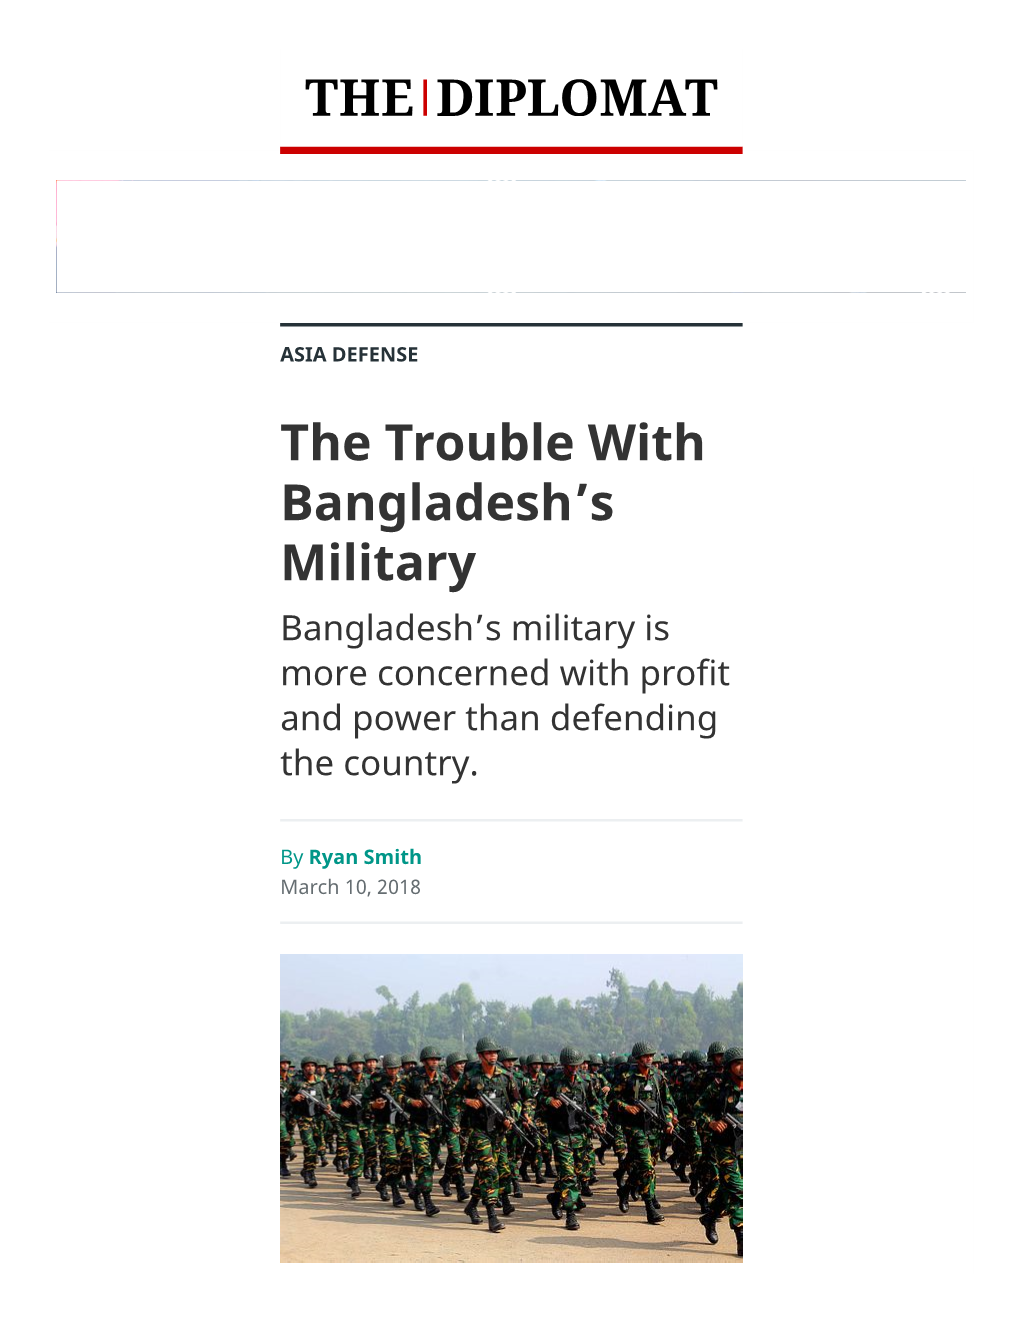 The Trouble with Bangladesh's Military